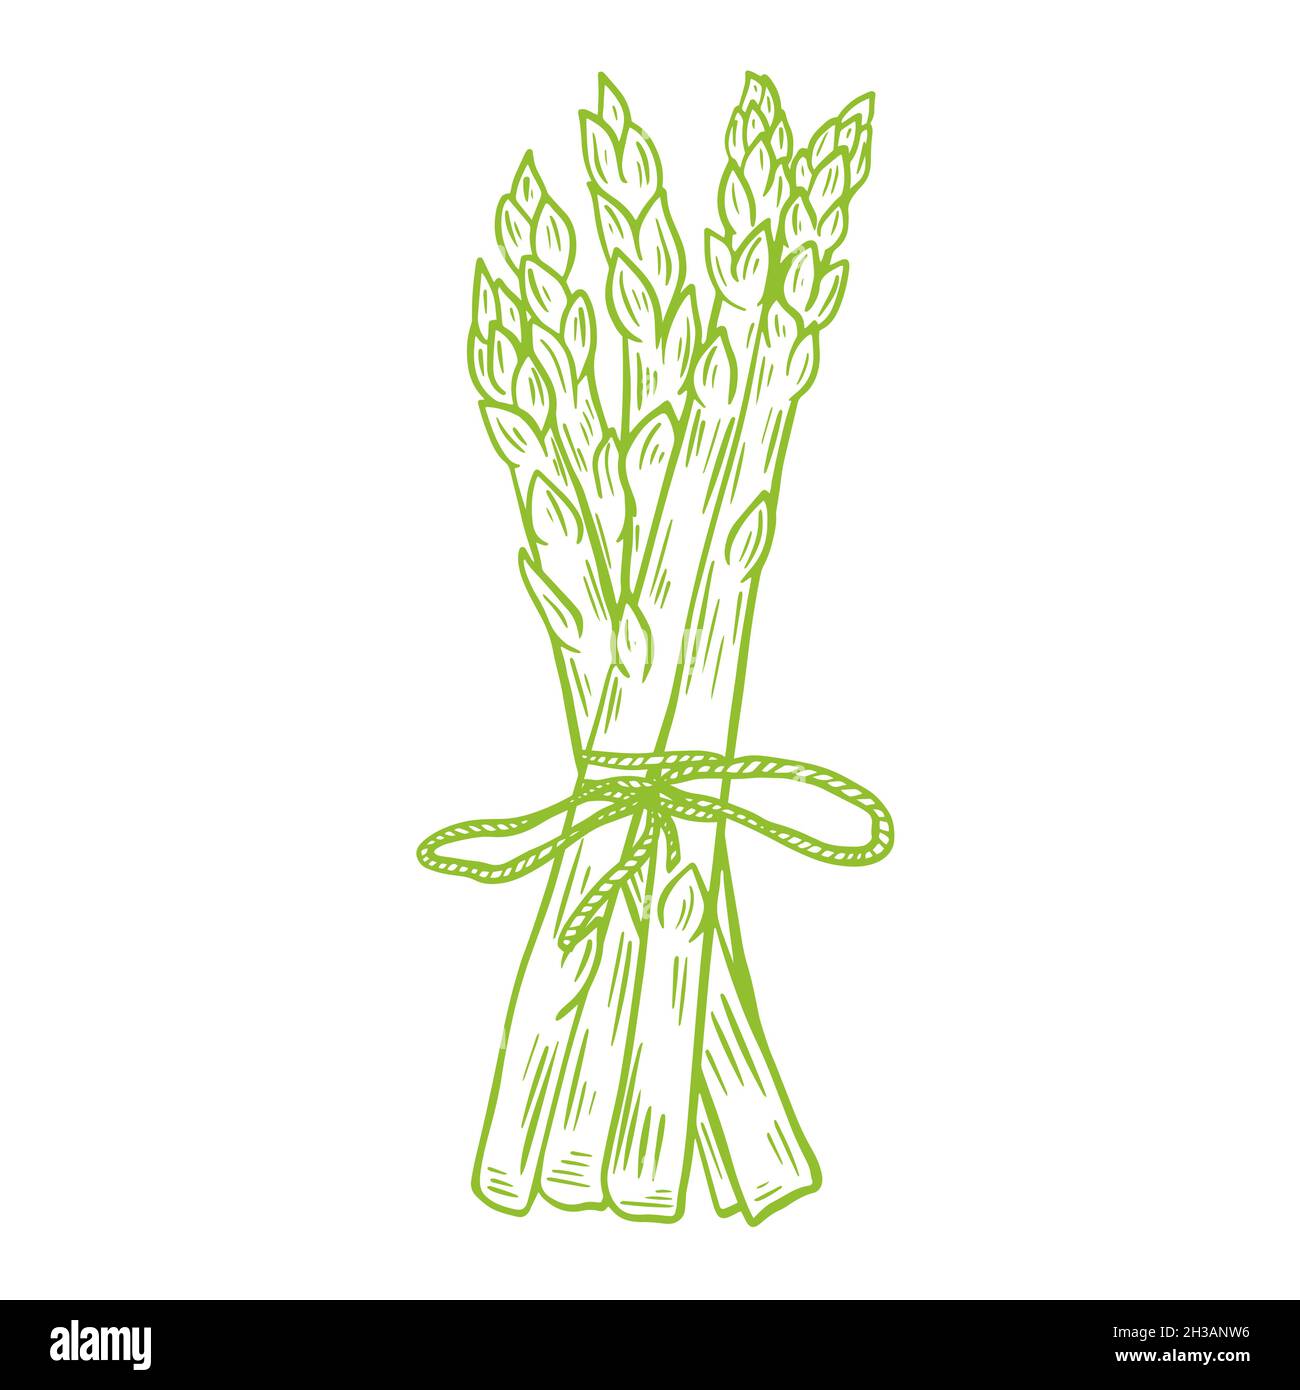 Bunch of fresh asparagus drawn sketch, vector illustration. Green organic wholesome grown food. Healthy lifestyle product. Engraving, vintage. Isolate Stock Vector